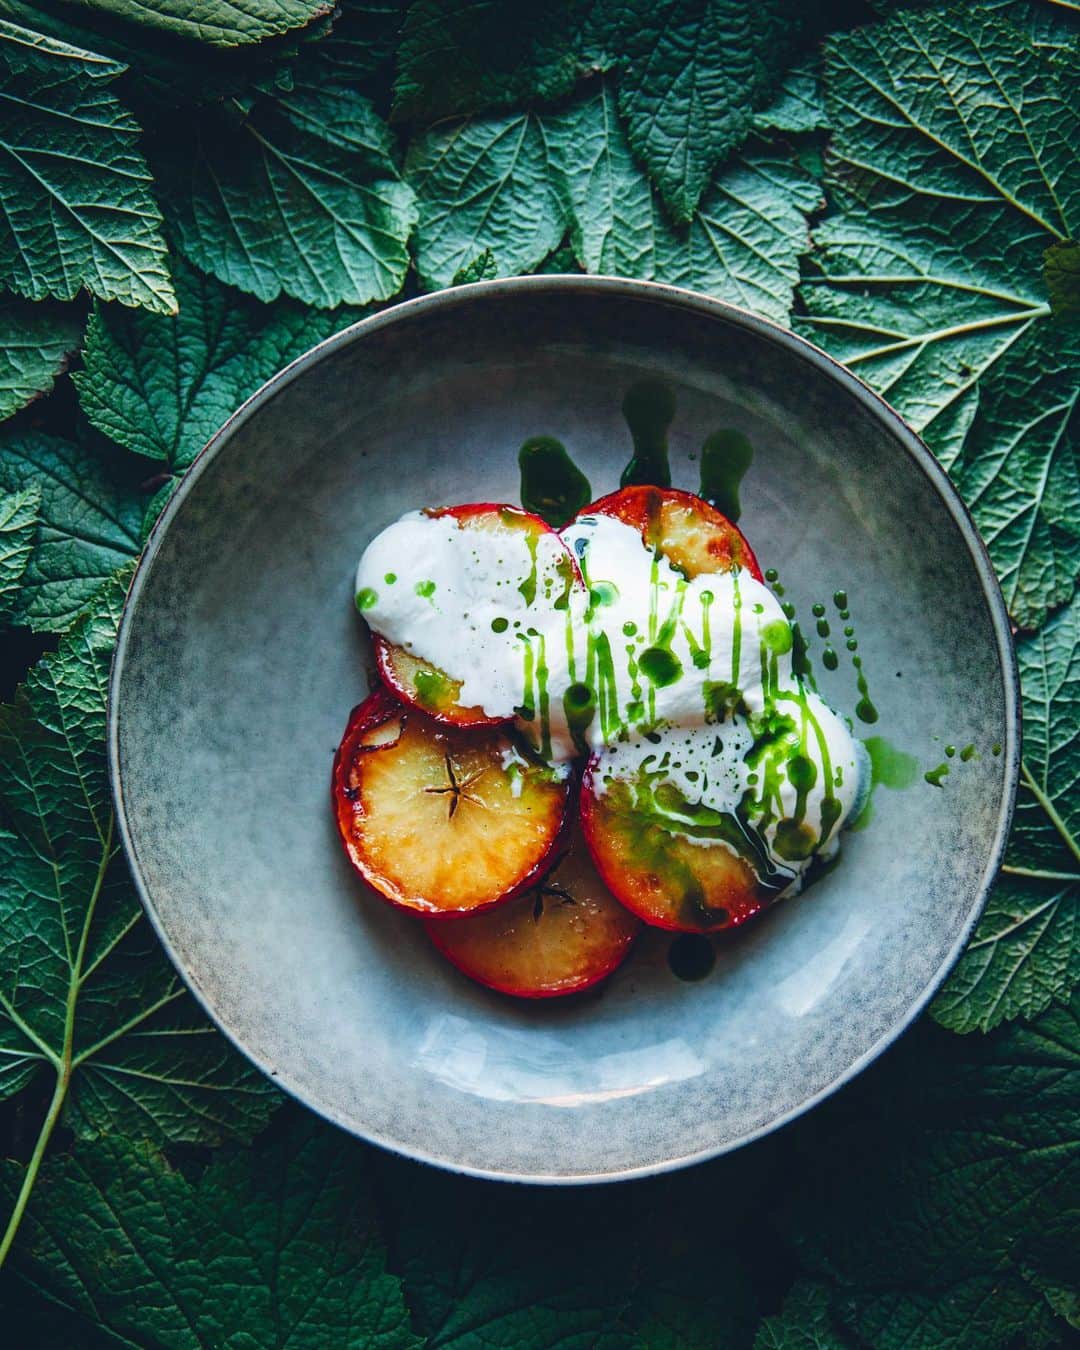 Linda Lomelinoのインスタグラム：「Caramellized apples with whipped cream and oil made from black currant leaves. Absolutely magical ✨Probably my favorite photo from @myfeldt’s new book ’Det växer saft och sylt överallt’. And as always with us two, completely improvised 🌱💚 #detväxersaftochsyltöverallt」